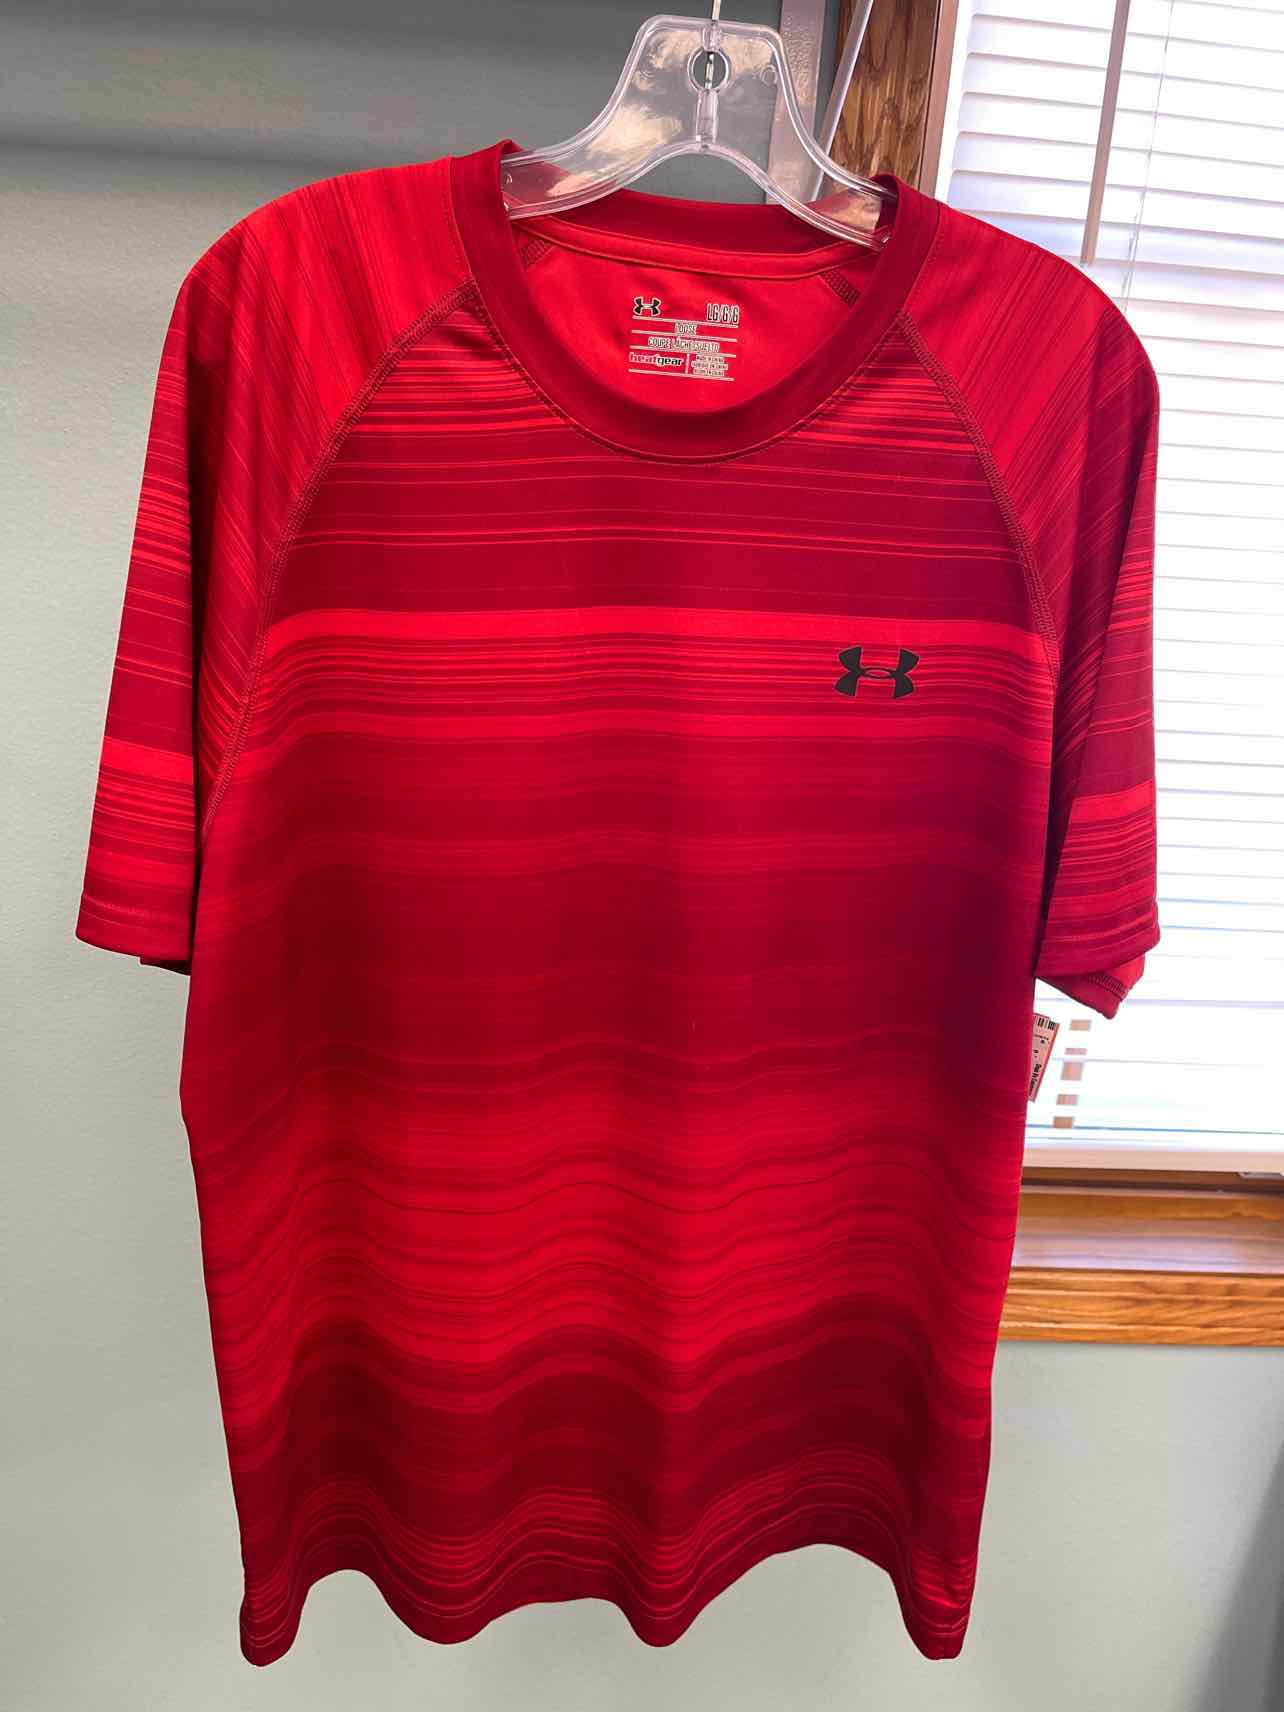 Men's Size Large Under Armour Red Short Sleeve